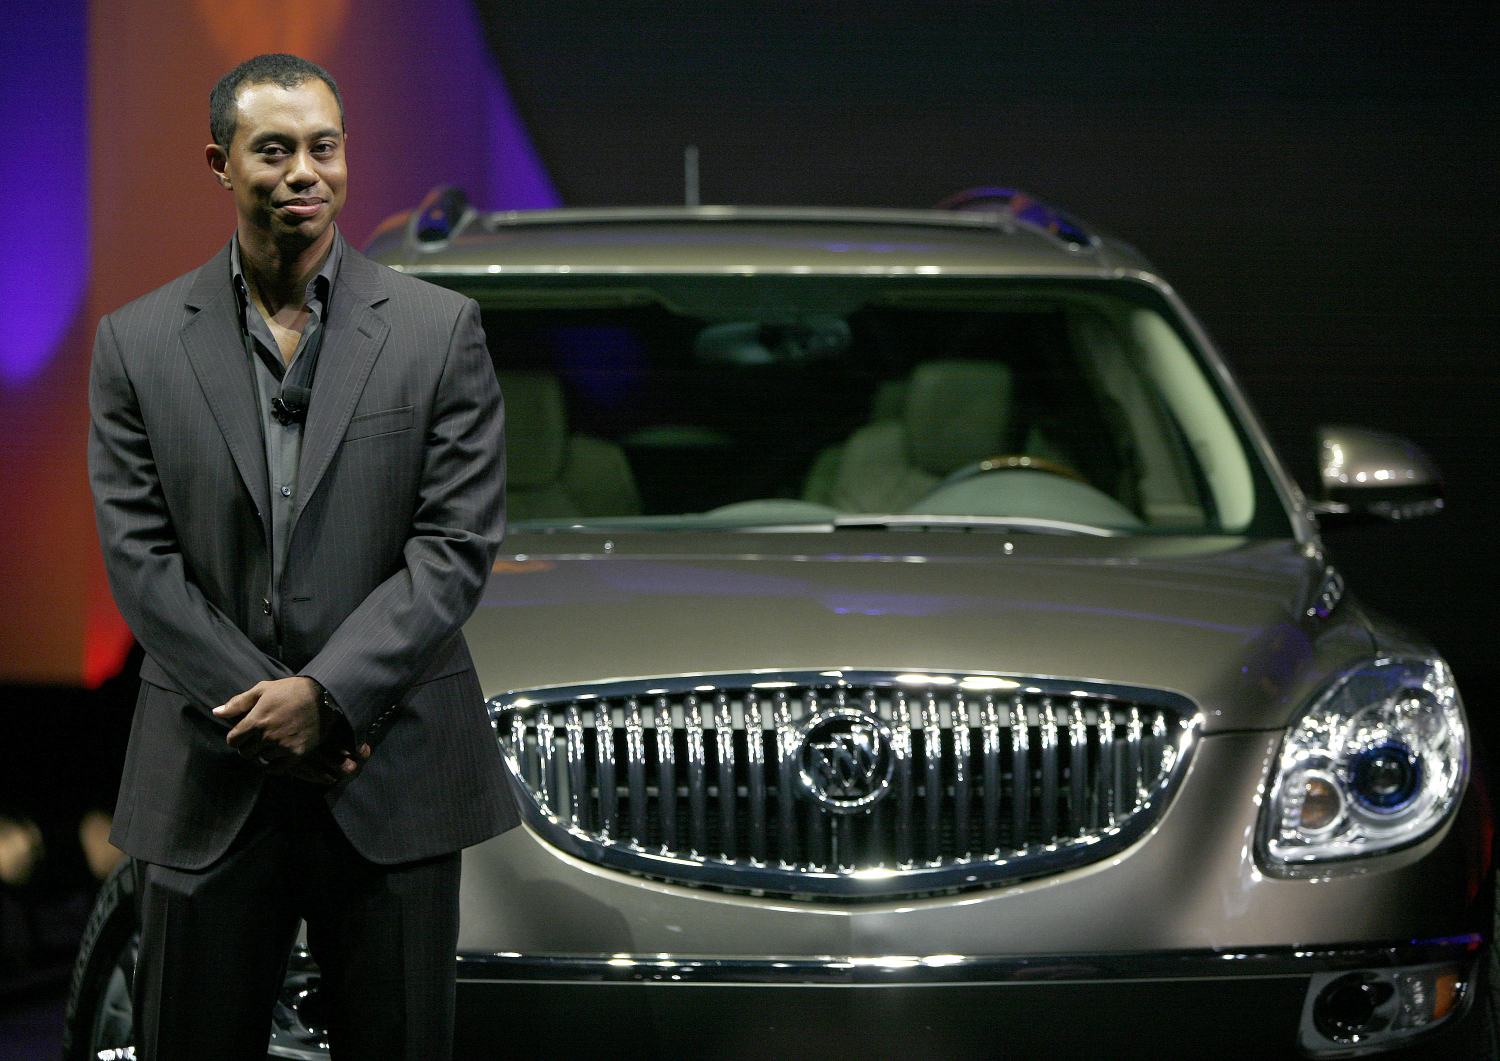 Tiger Woods luxury car collection included a Buick Enclave